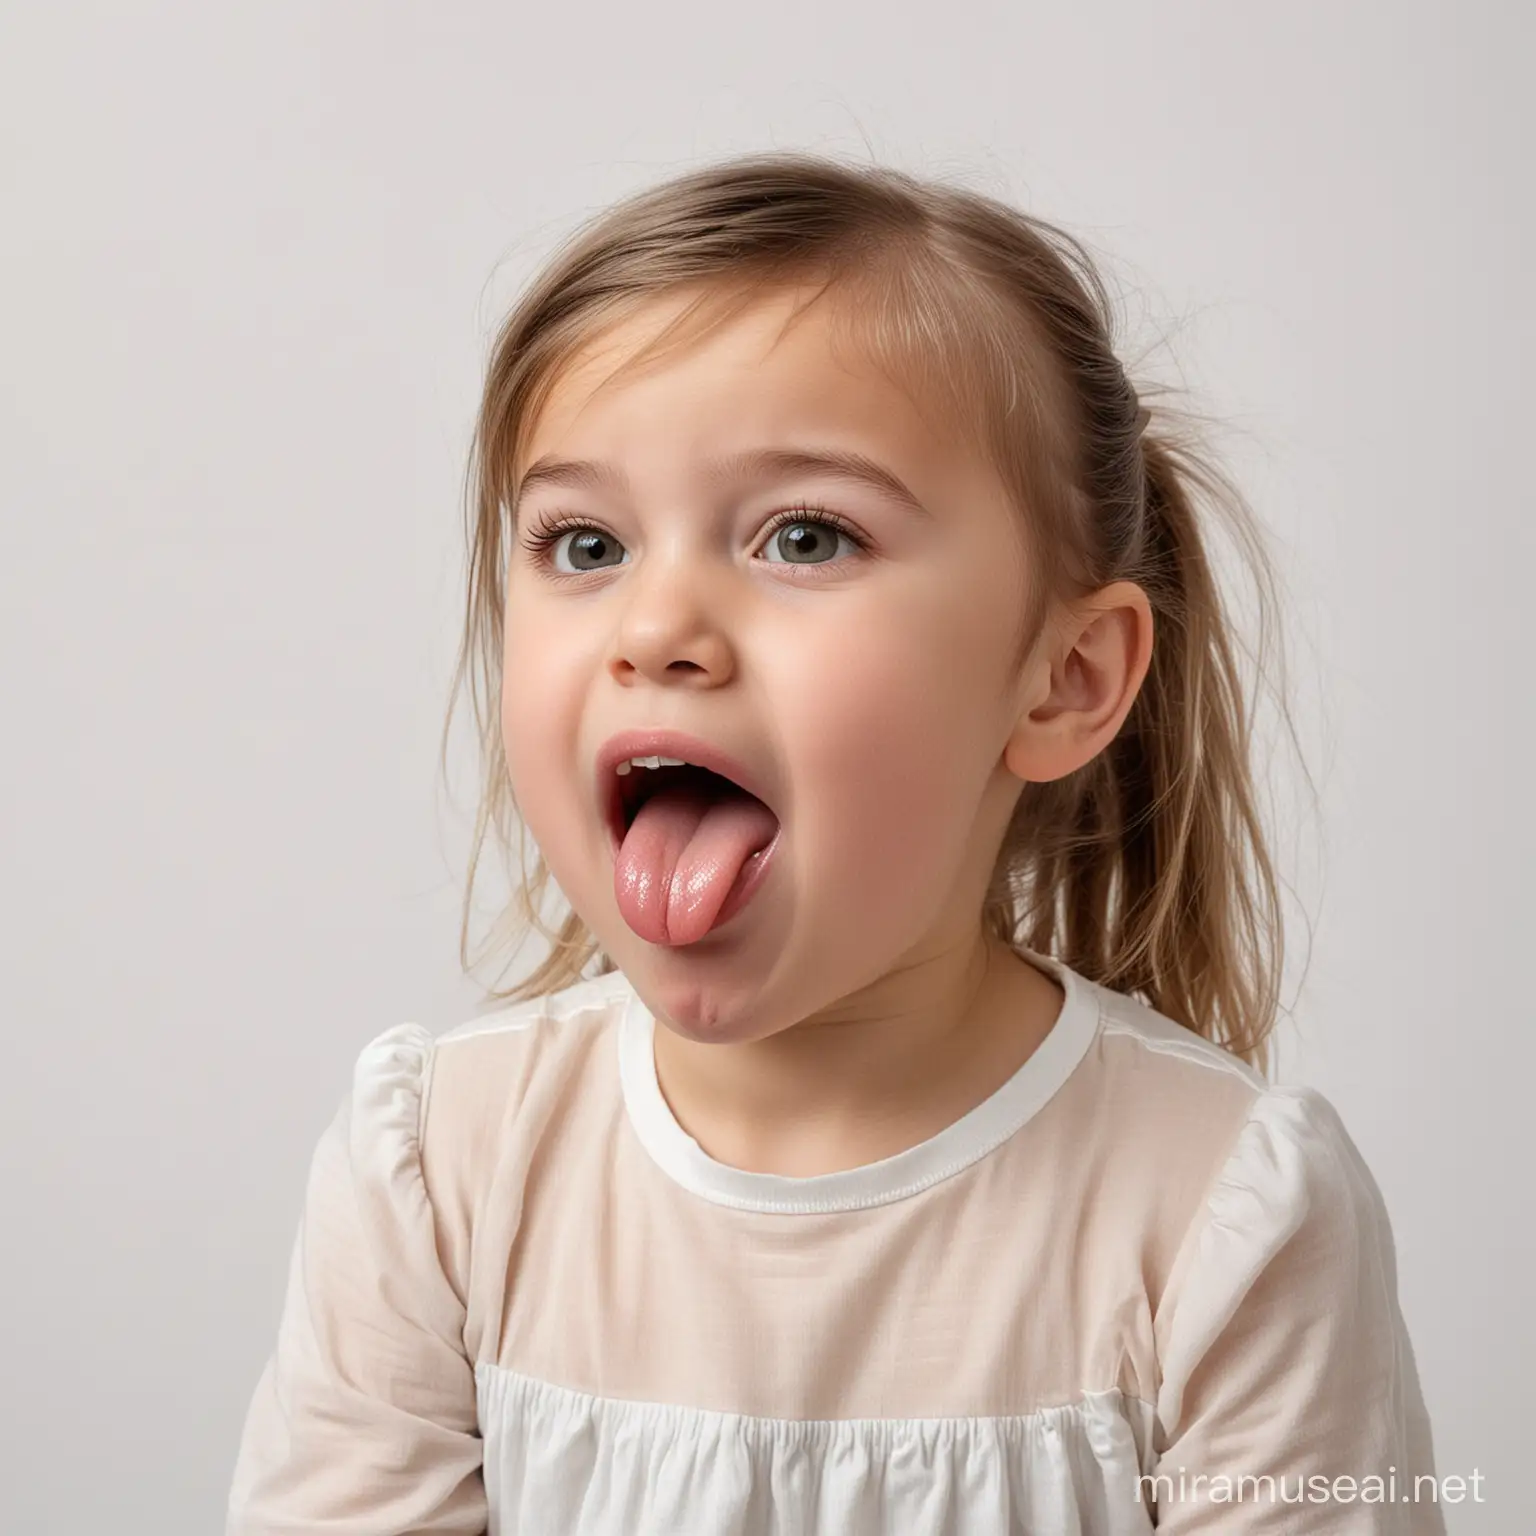 Playful Toddler Sticking Tongue Out Profile Portrait